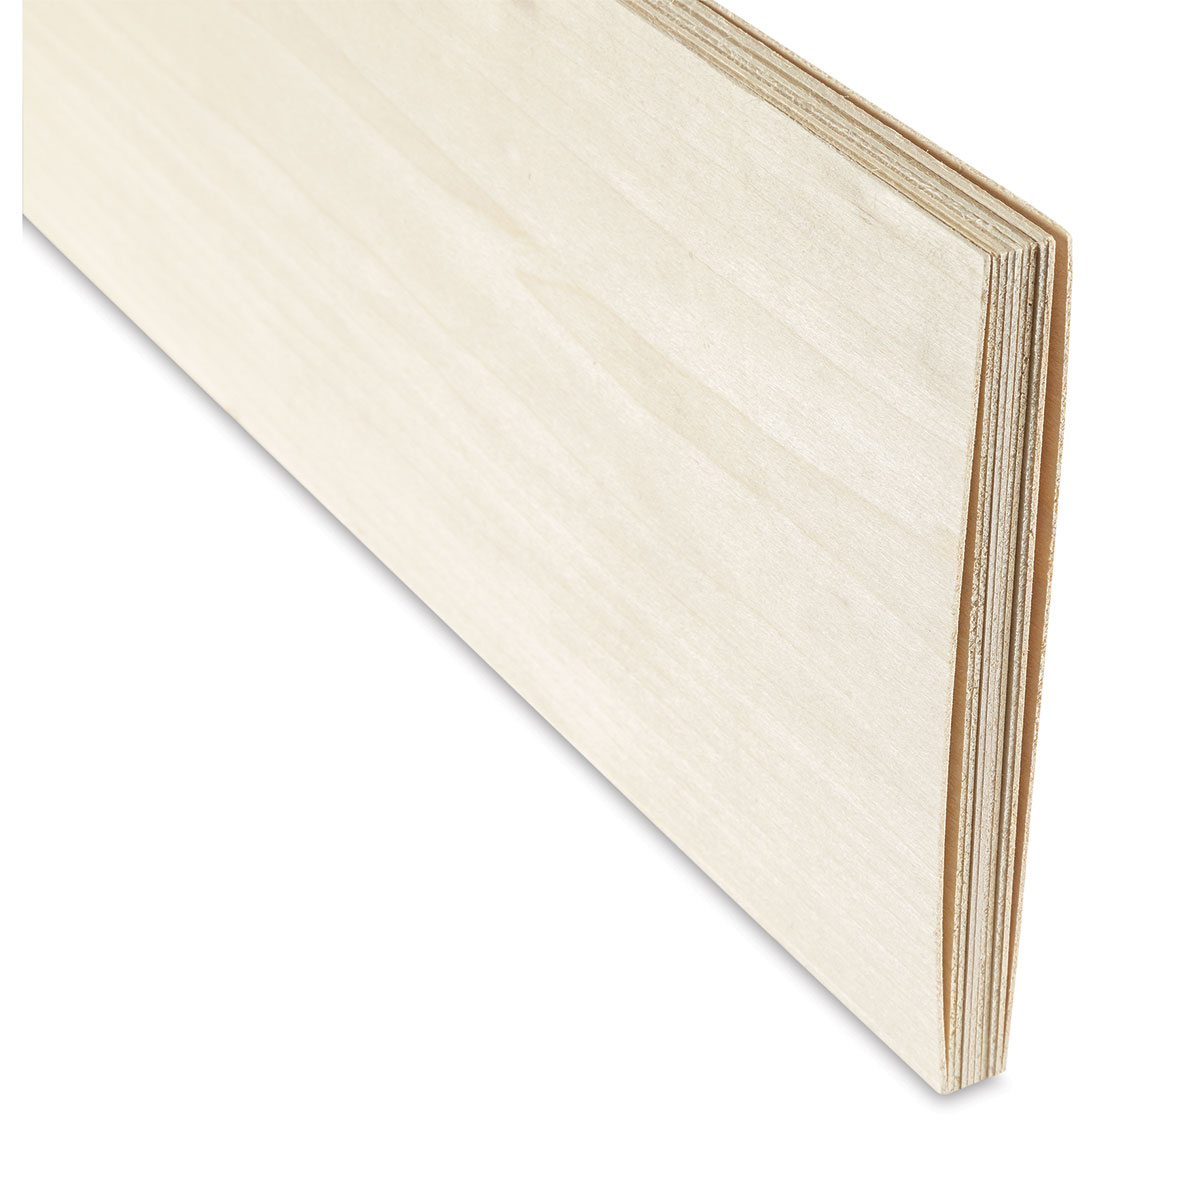 Midwest Products Genuine Basswood Sheet - 10 Sheets, 1/8 x 6 x 36